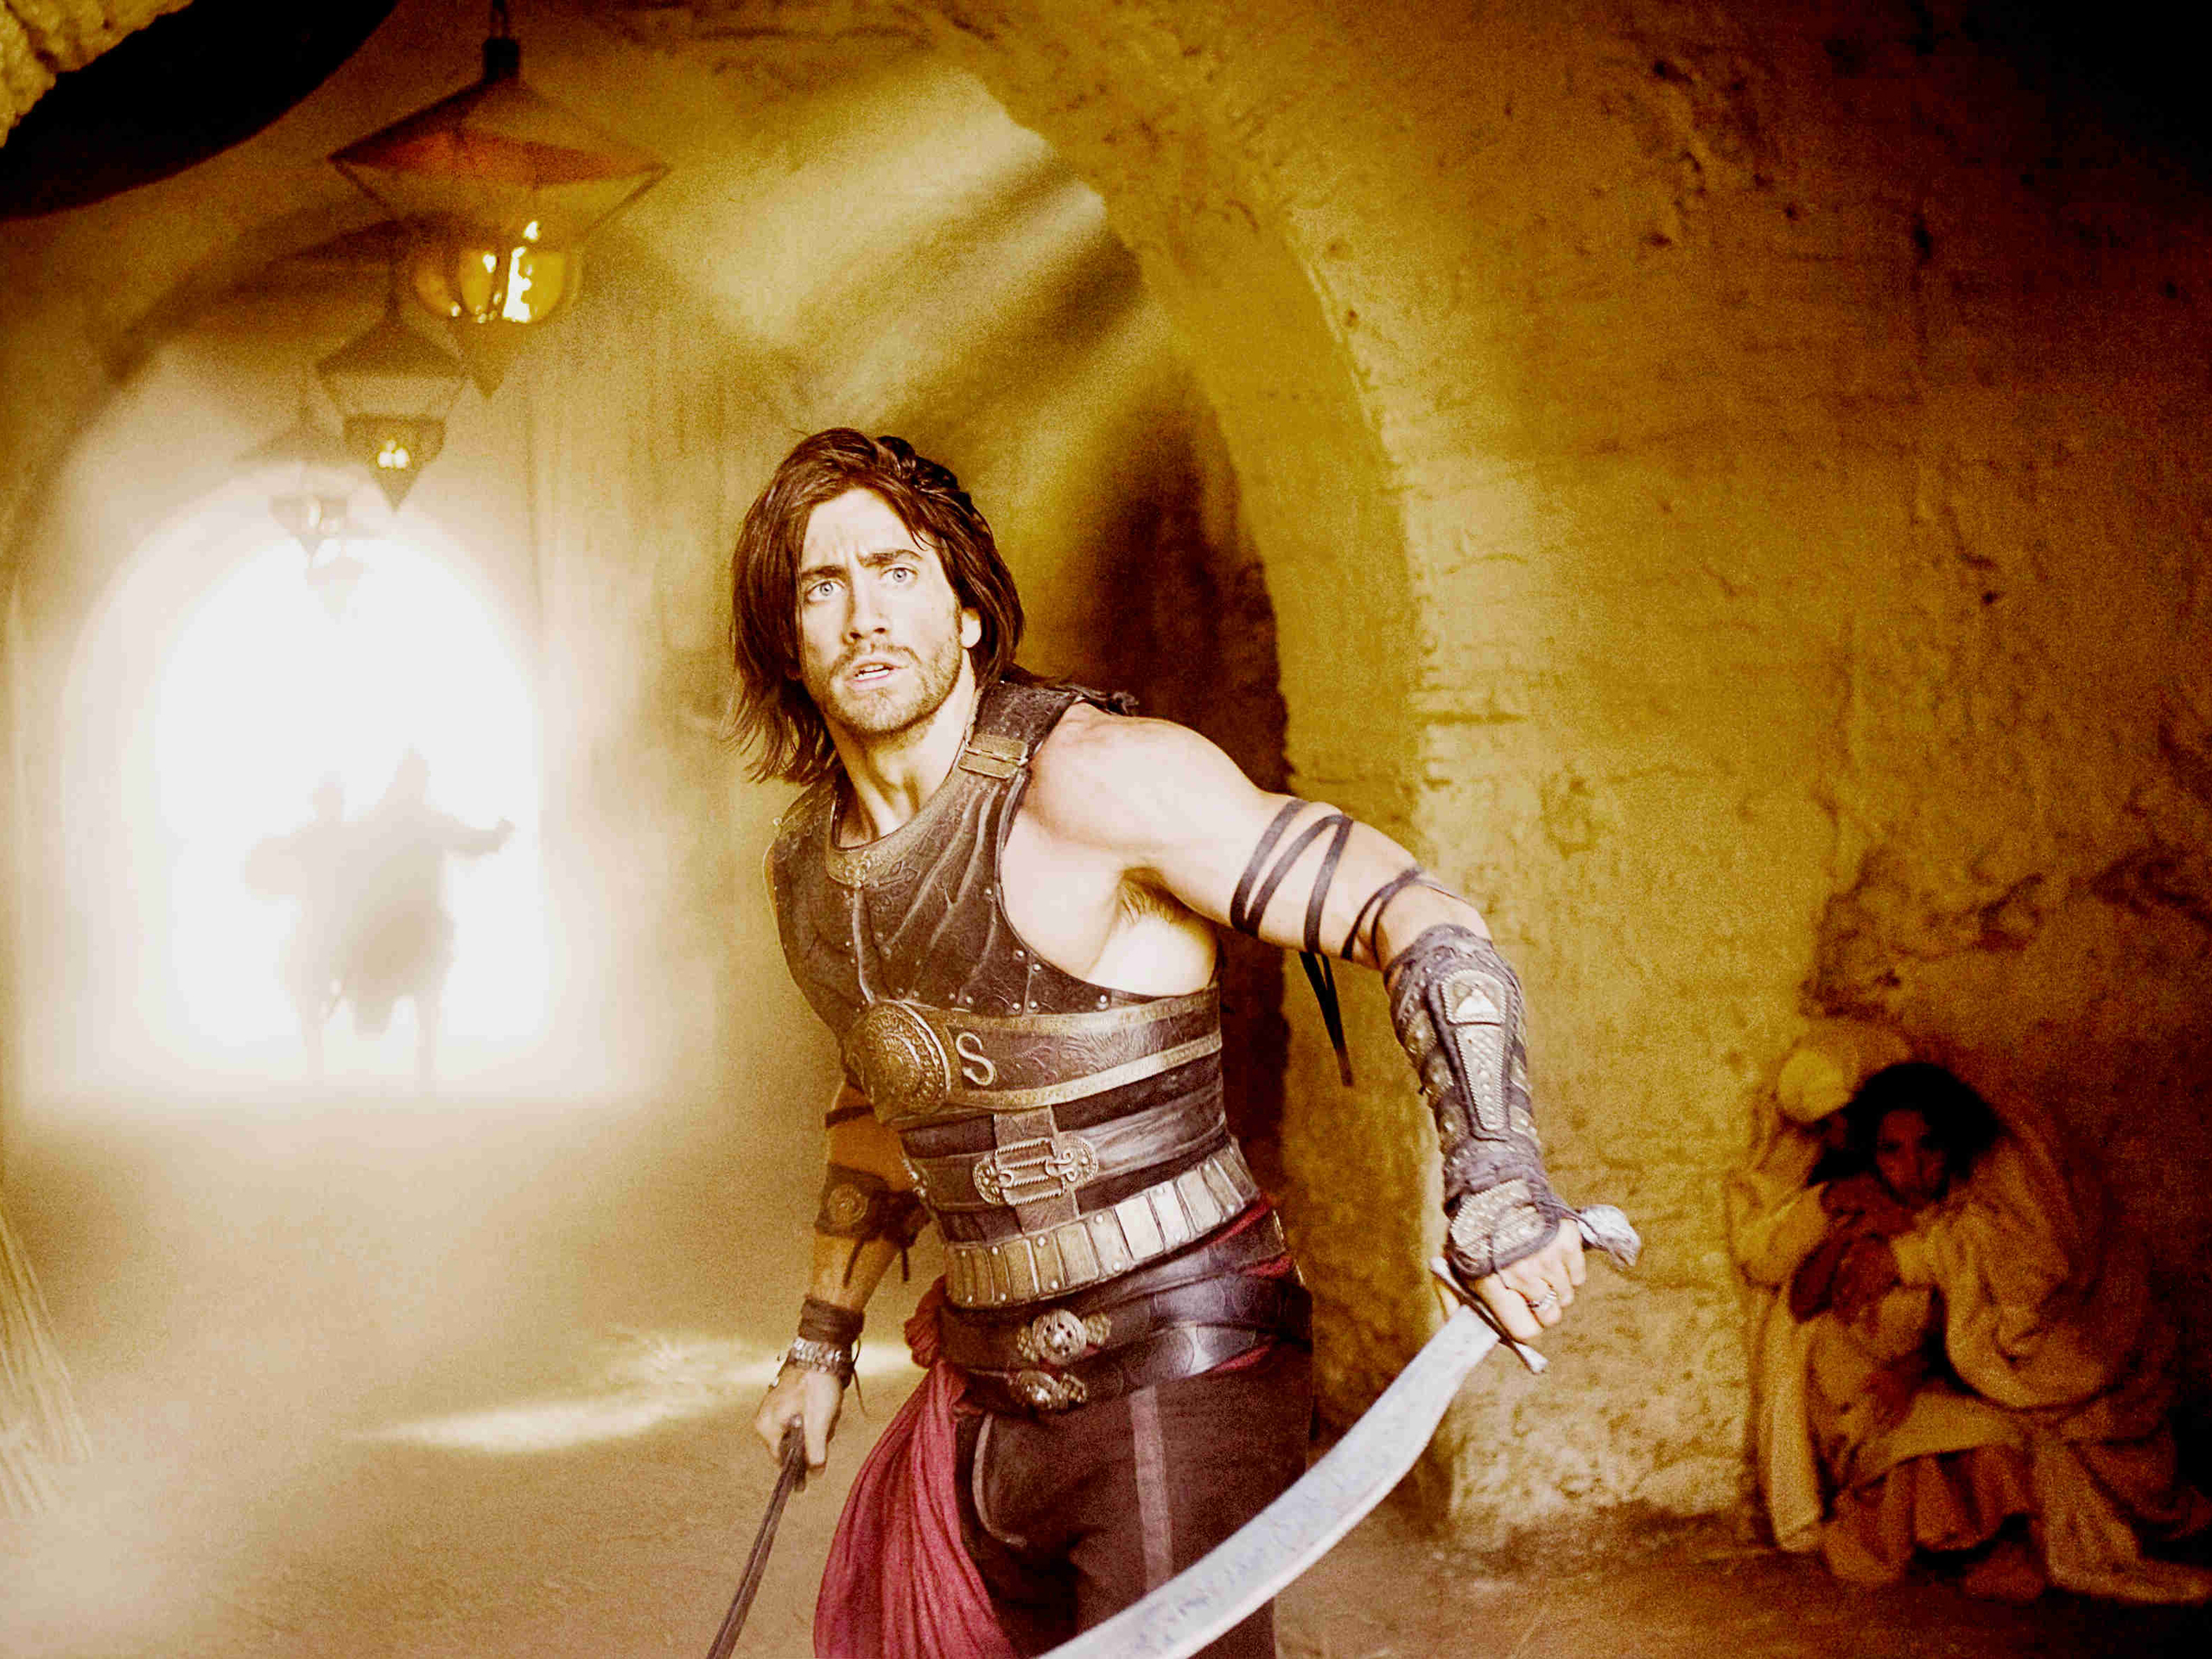 movie, prince of persia: the sands of time, jake gyllenhaal, prince dastan, prince of persia phone wallpaper